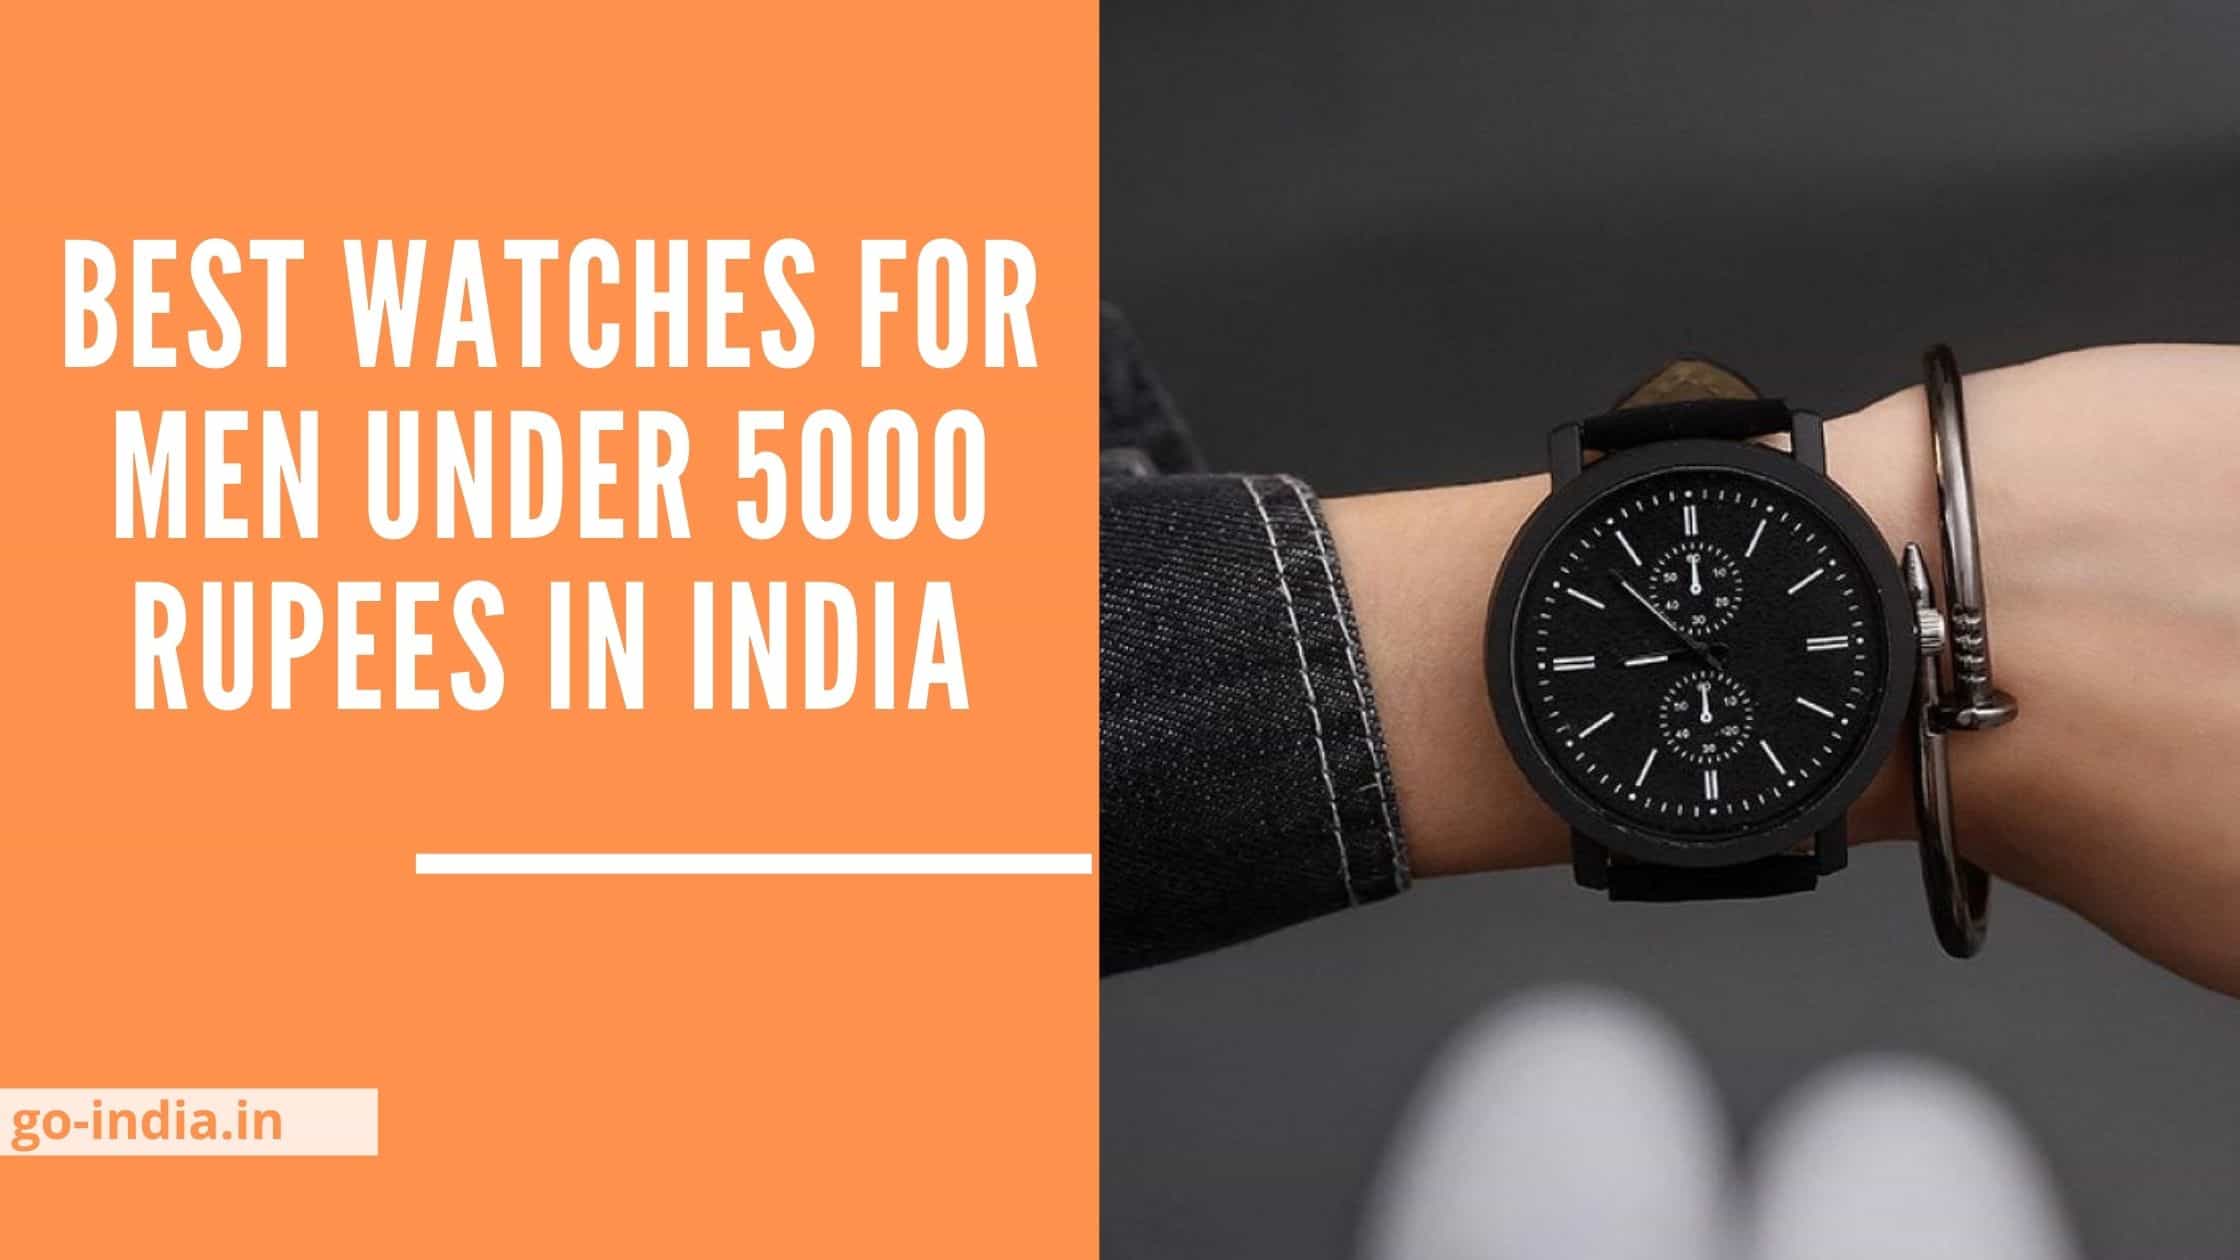 Top 10 Best Watches for Men Under 5000 Rupees in India 2022